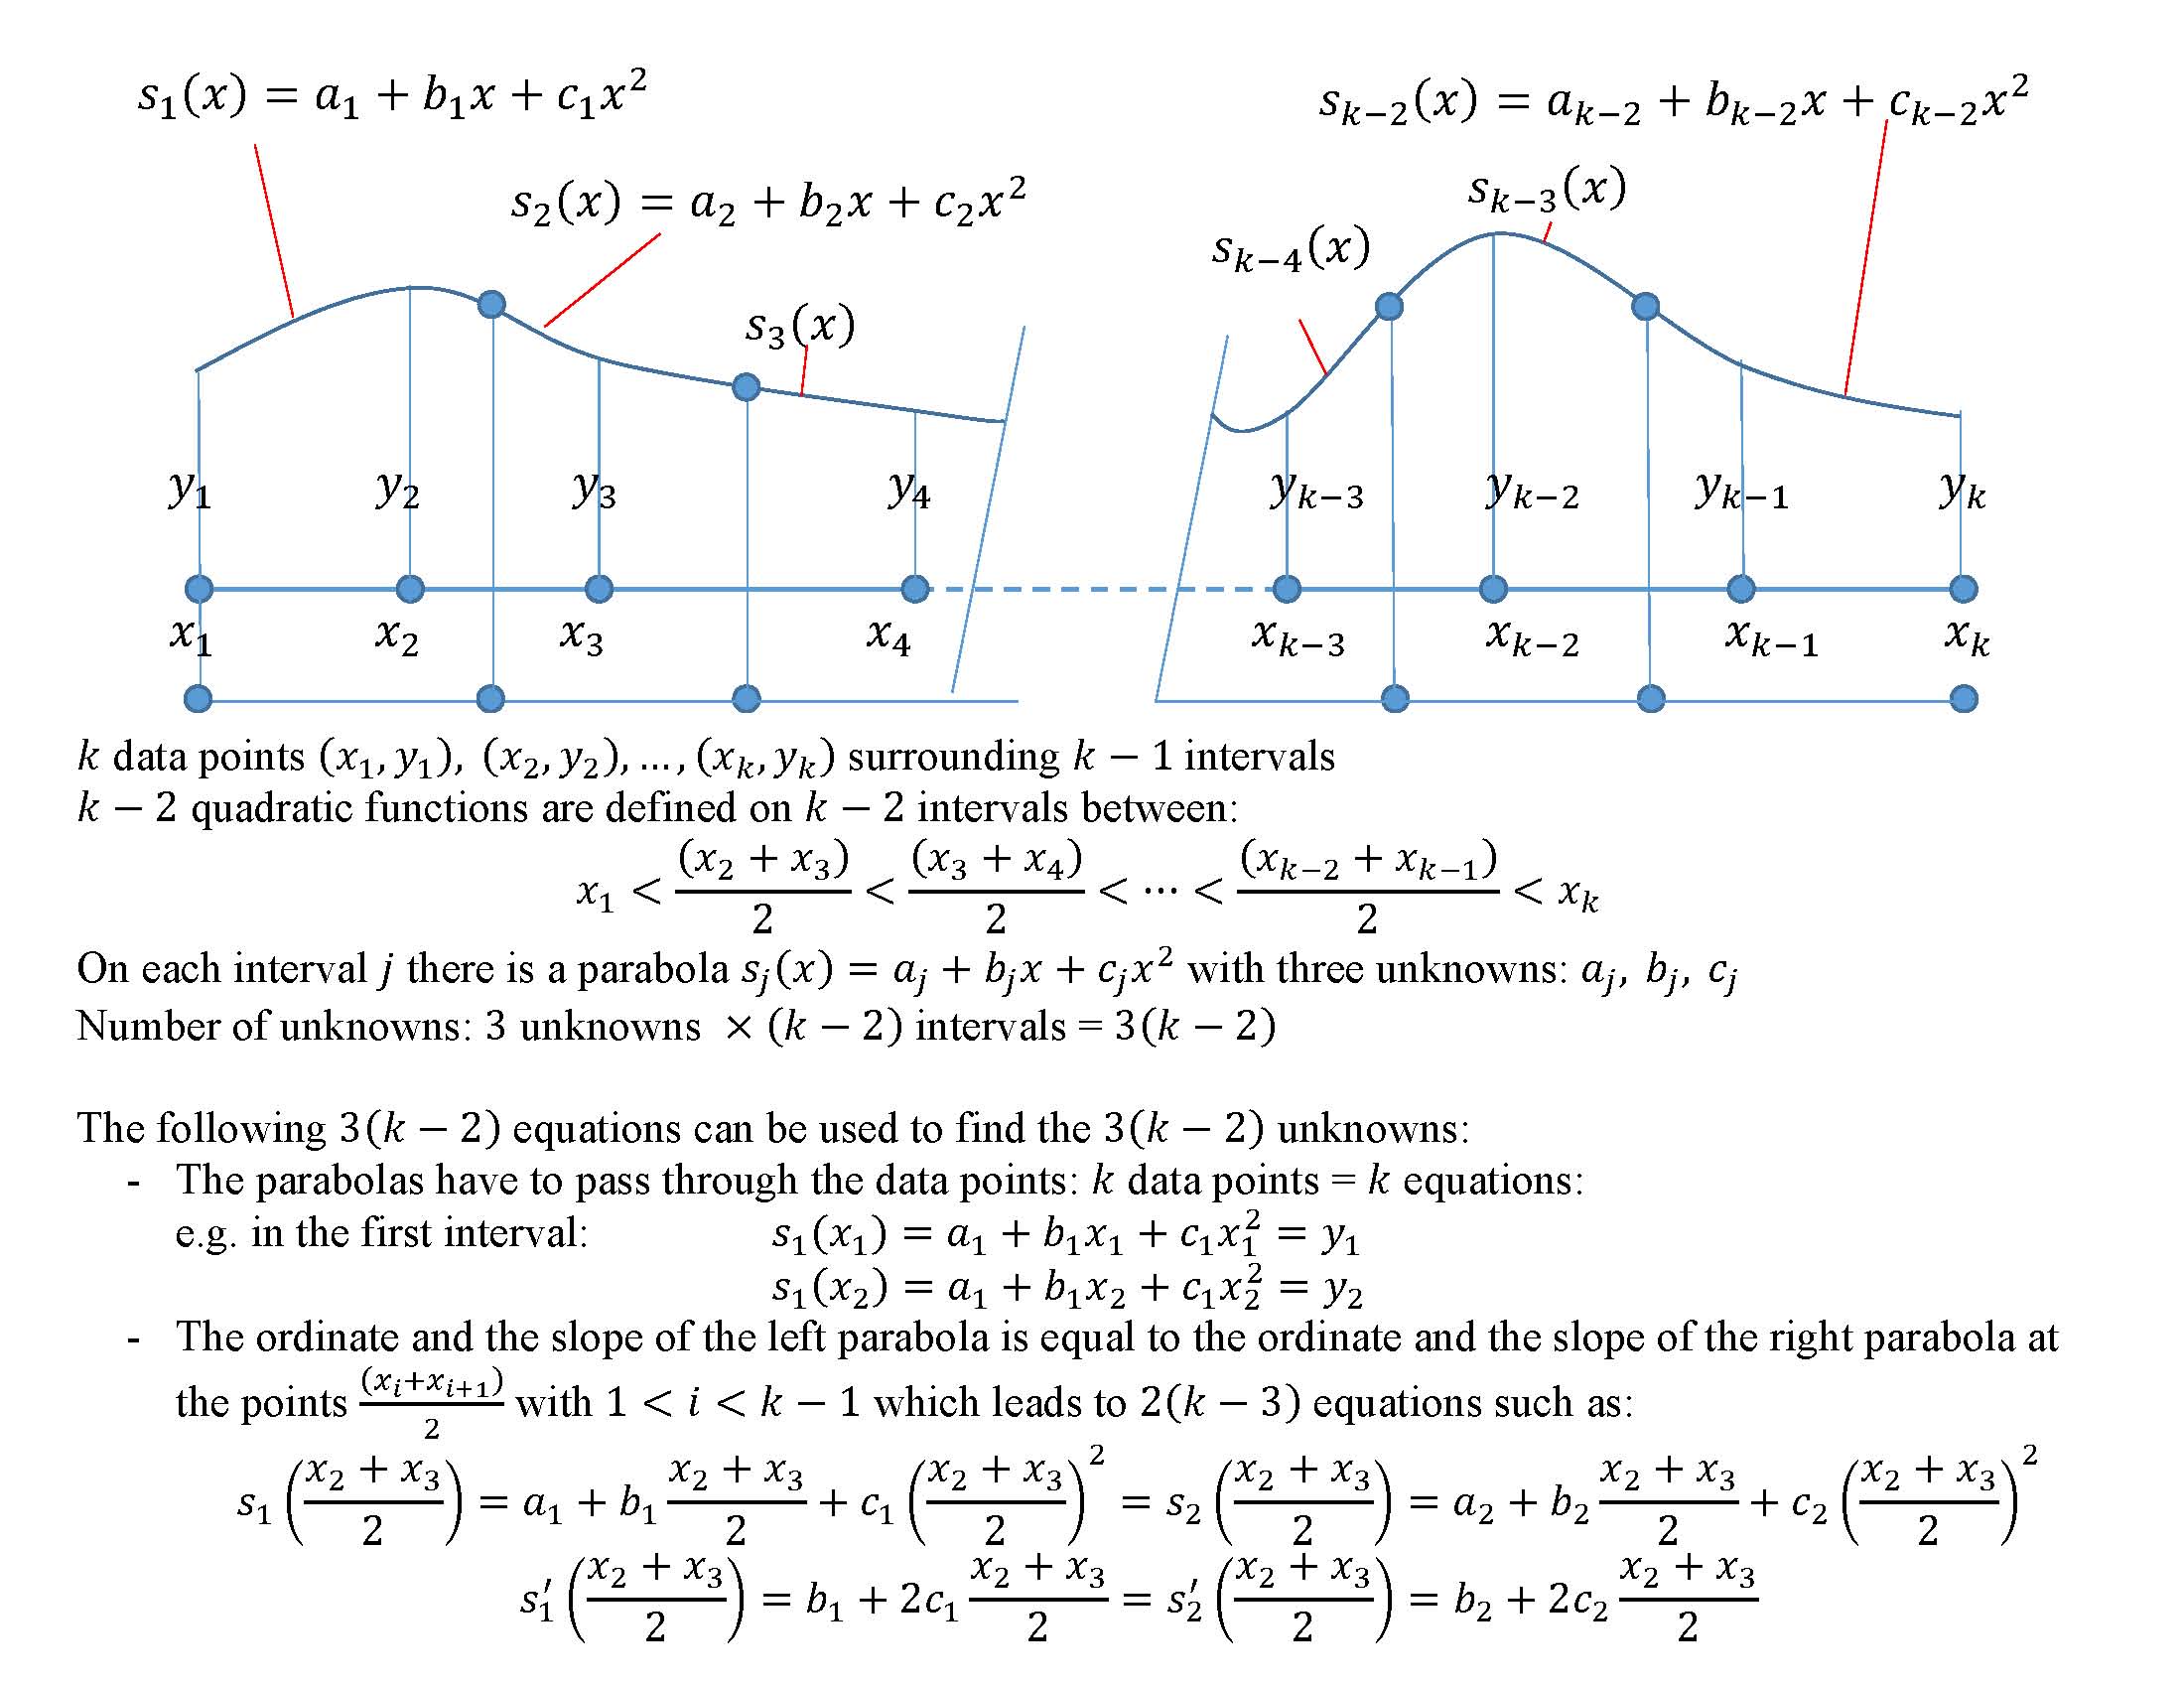 Scheme 2 of piecewise quadratic interpolation with continuity in the interpolating function and its first derivative